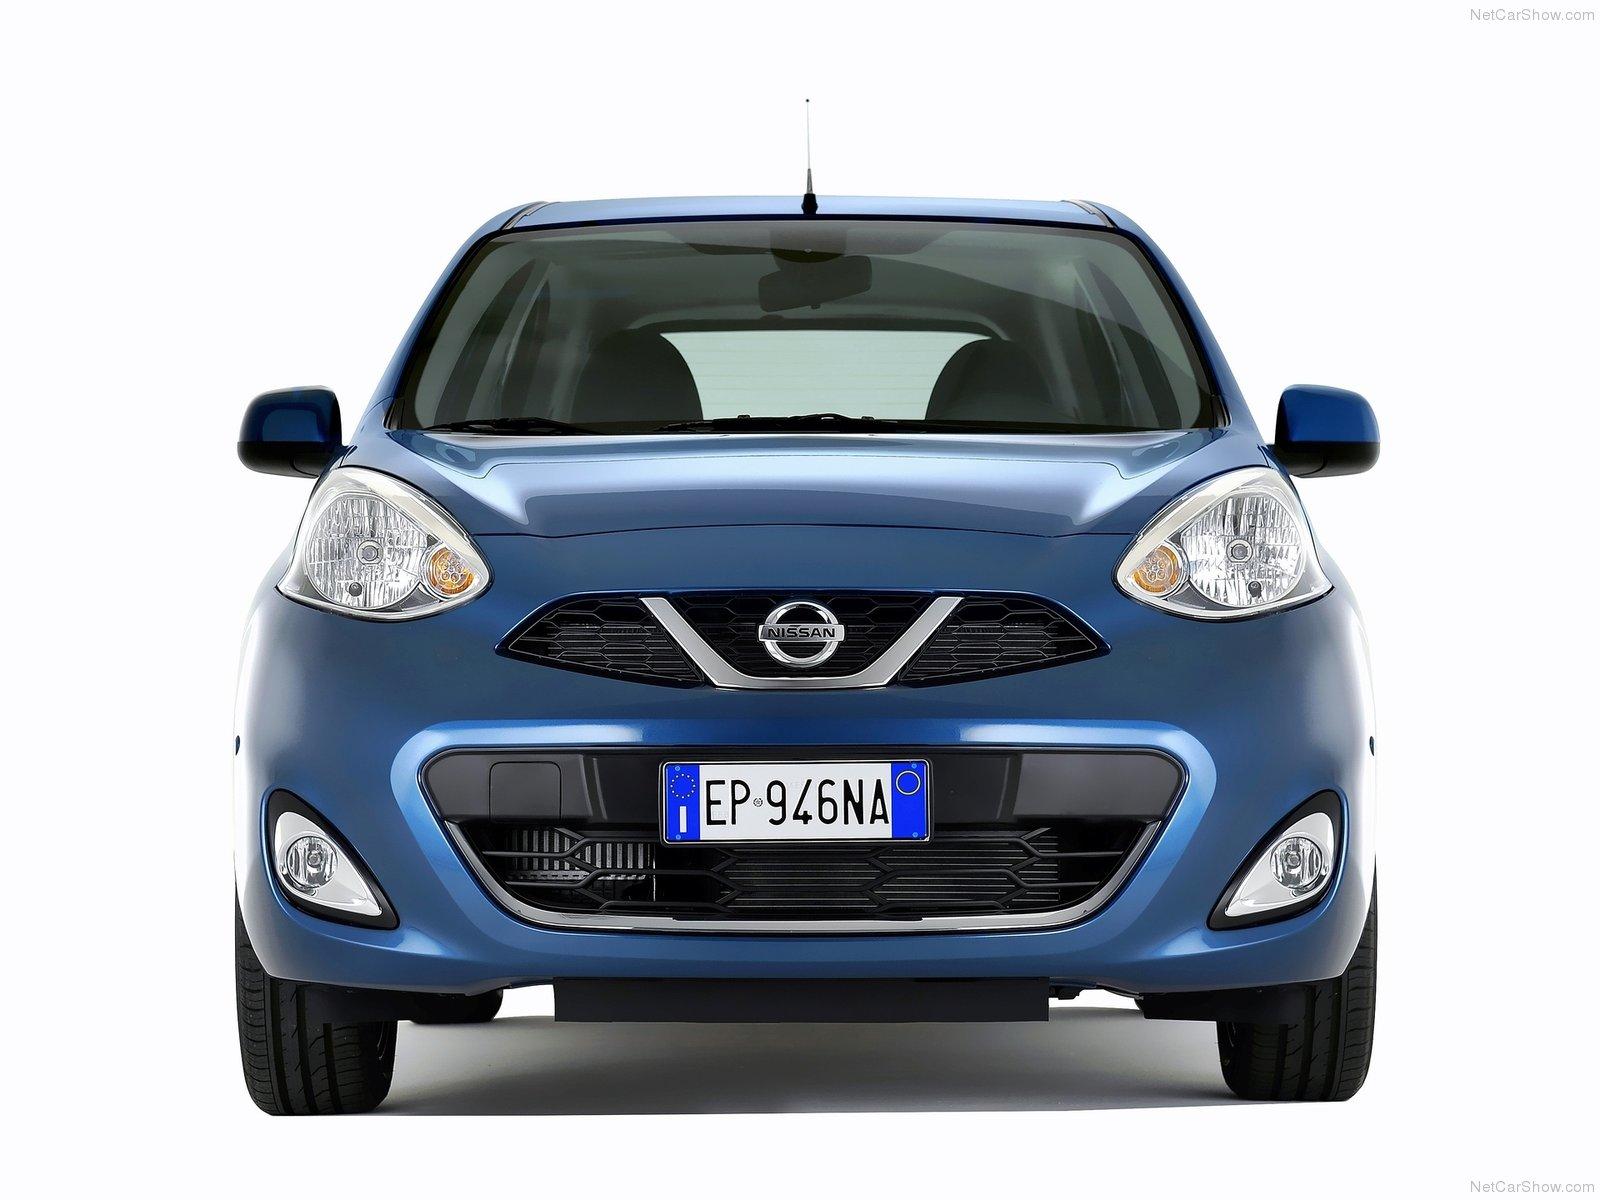 Nissan Micra facelift photo gallery